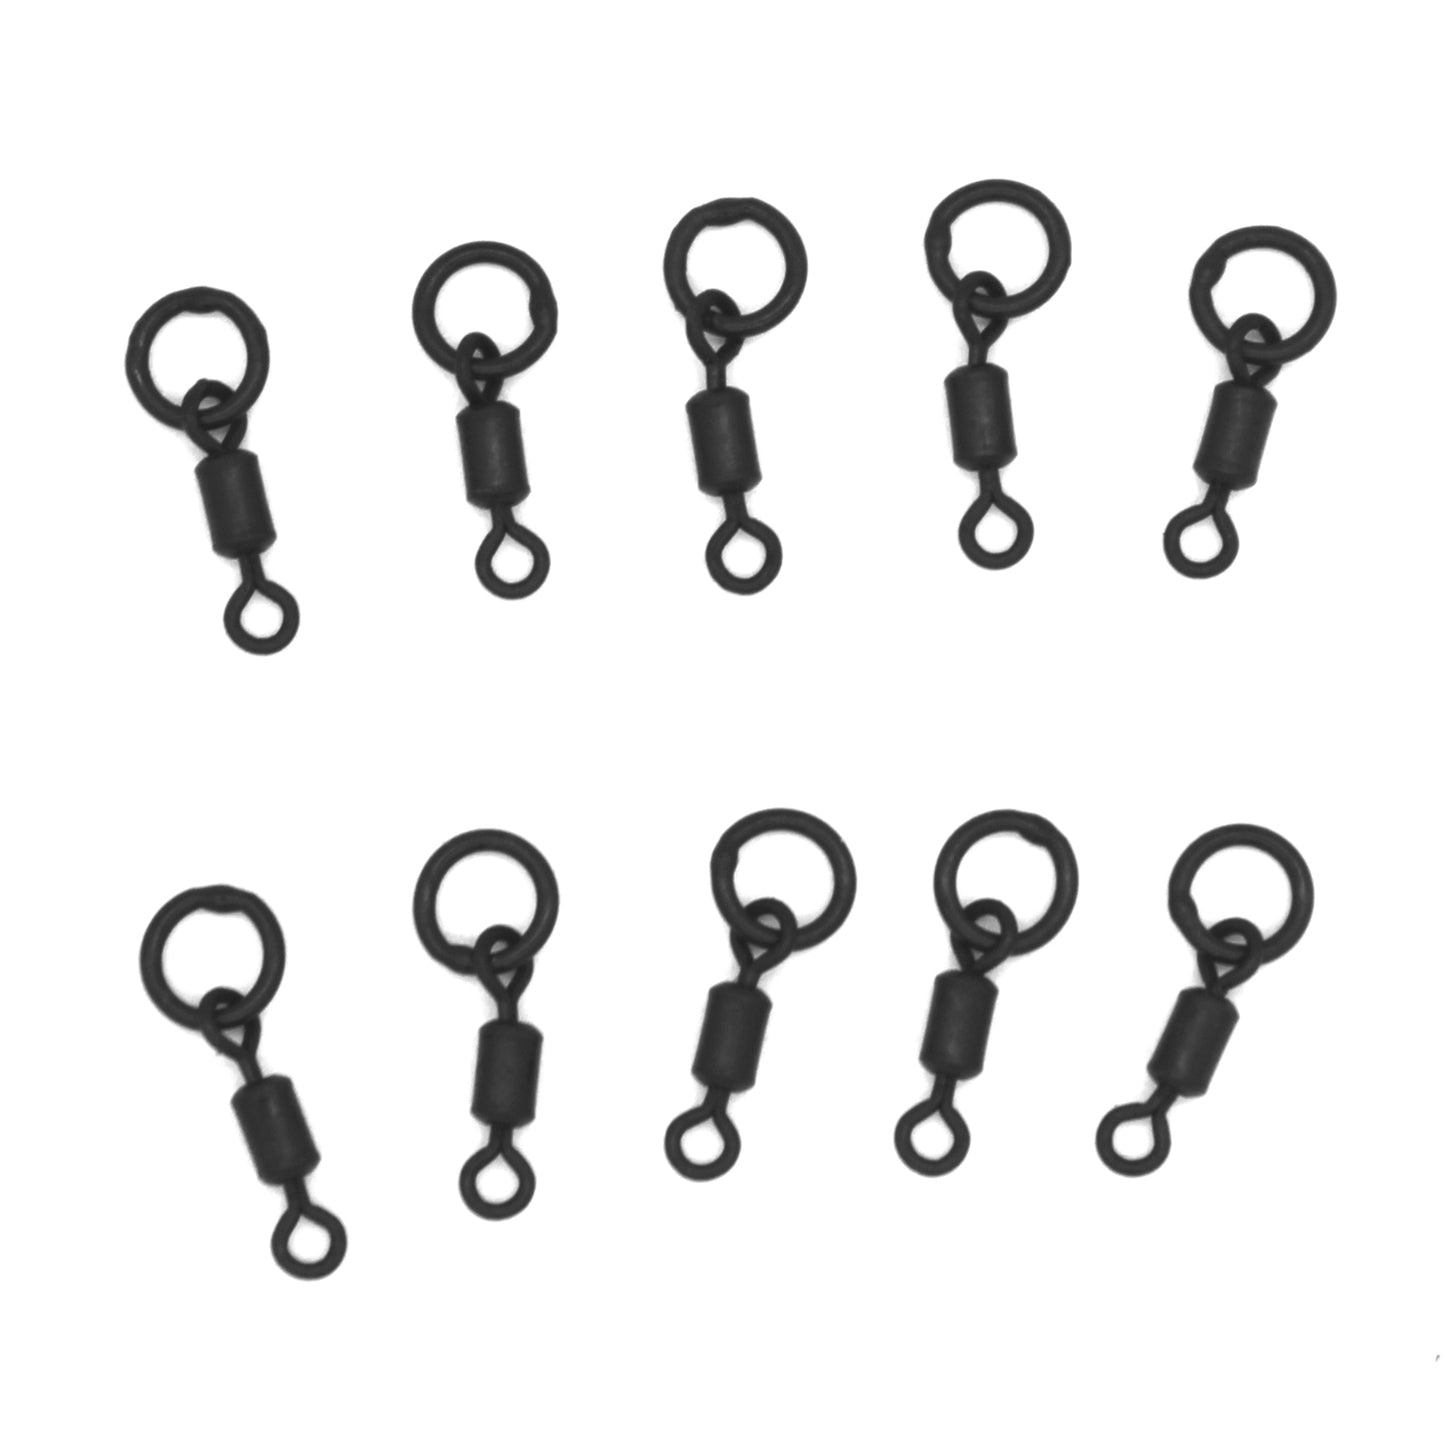 Deception Angling Ring Swivels 10 Pack Fishing